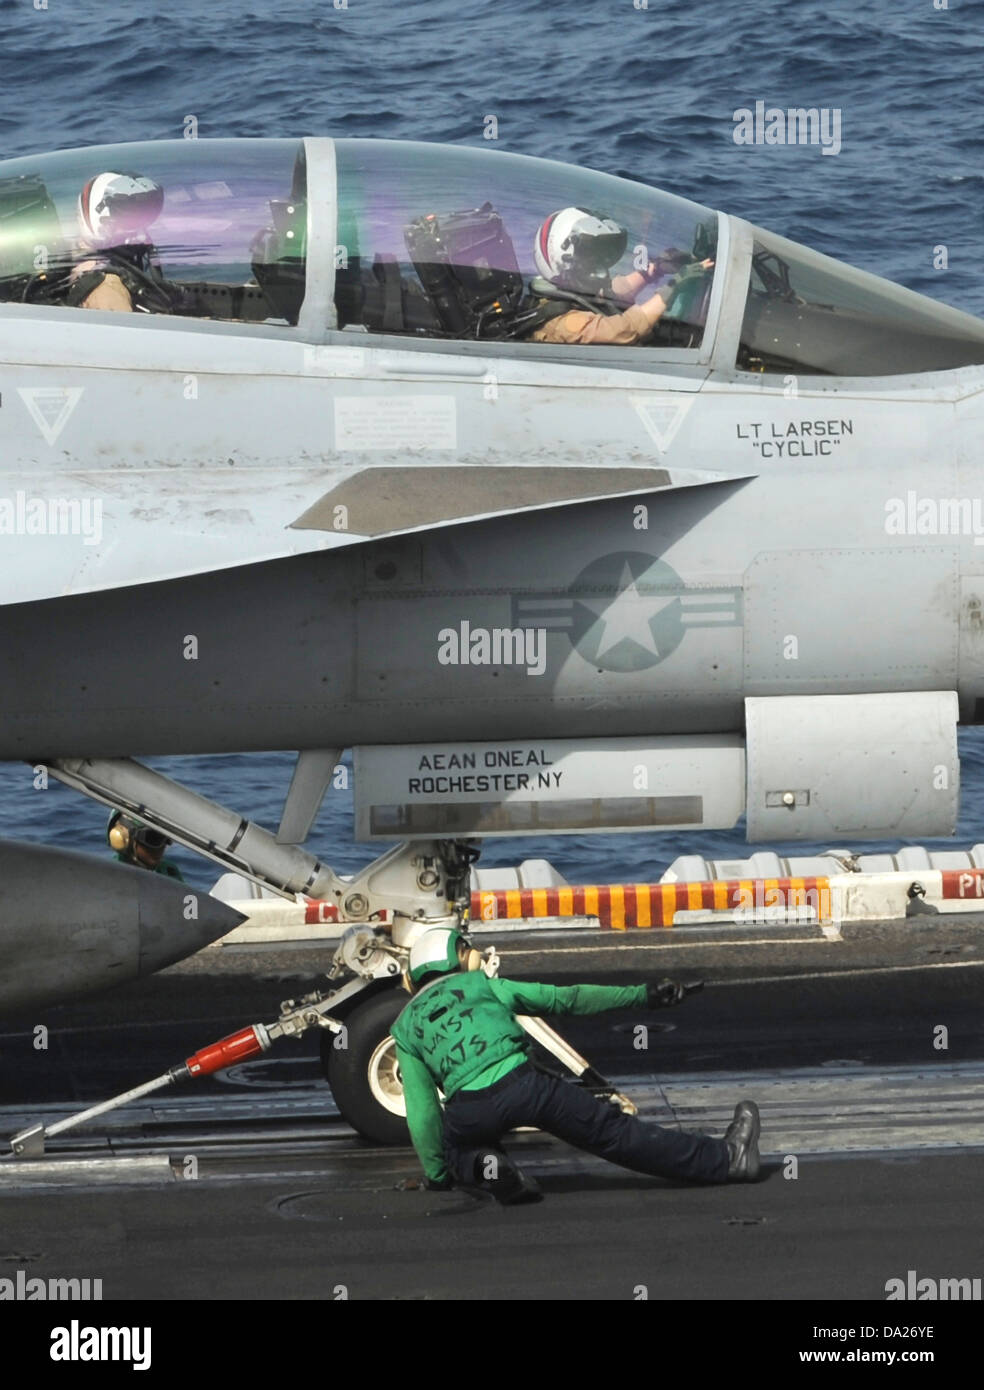 A US Navy F/A-18F Super Hornet fighter aircraft prepares to launch from the aircraft carrier USS Nimitz June 29, 2013 operating in the Arabian Sea. The Nimitz Carrier Strike Group is deployed to the U.S. 5th Fleet area of responsibility conducting maritime security operations, theater security cooperation efforts and support missions for Operation Enduring Freedom. Stock Photo